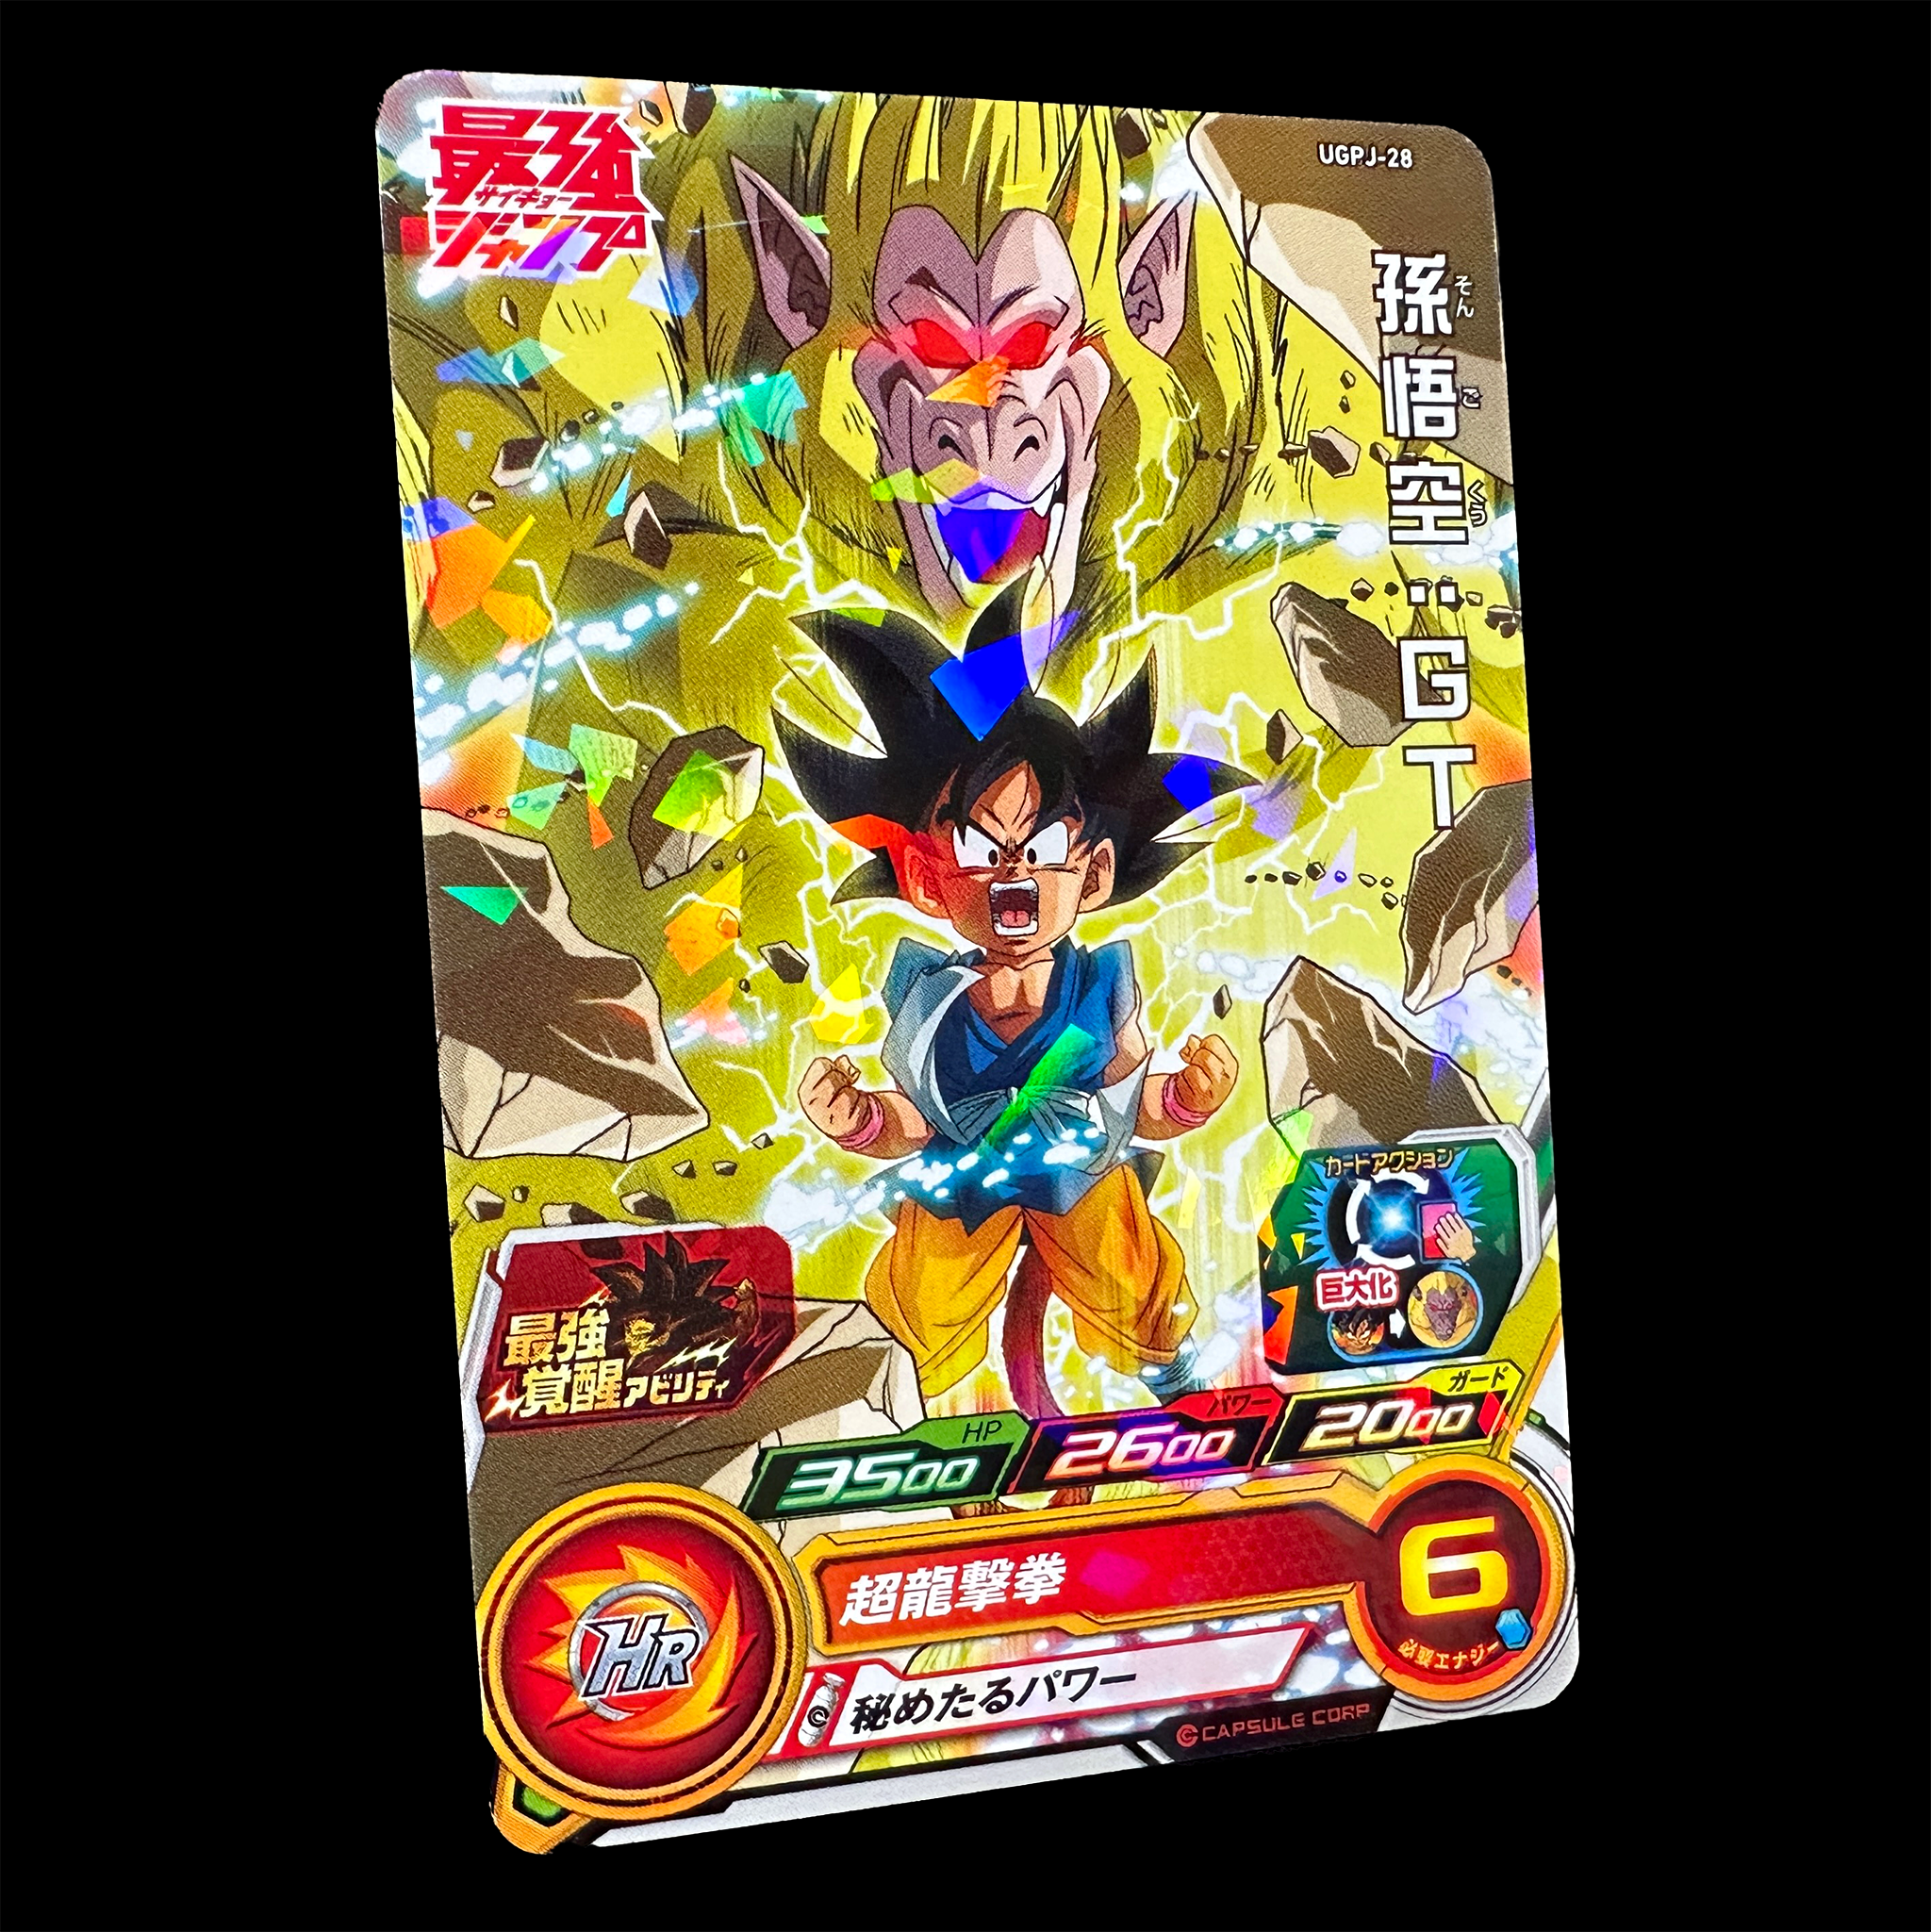 SUPER DRAGON BALL HEROES UGPJ-28  Promotional card sold with the June 2023 issue of Saikyo Jump magazine released May 2 2023  Son Goku : GT